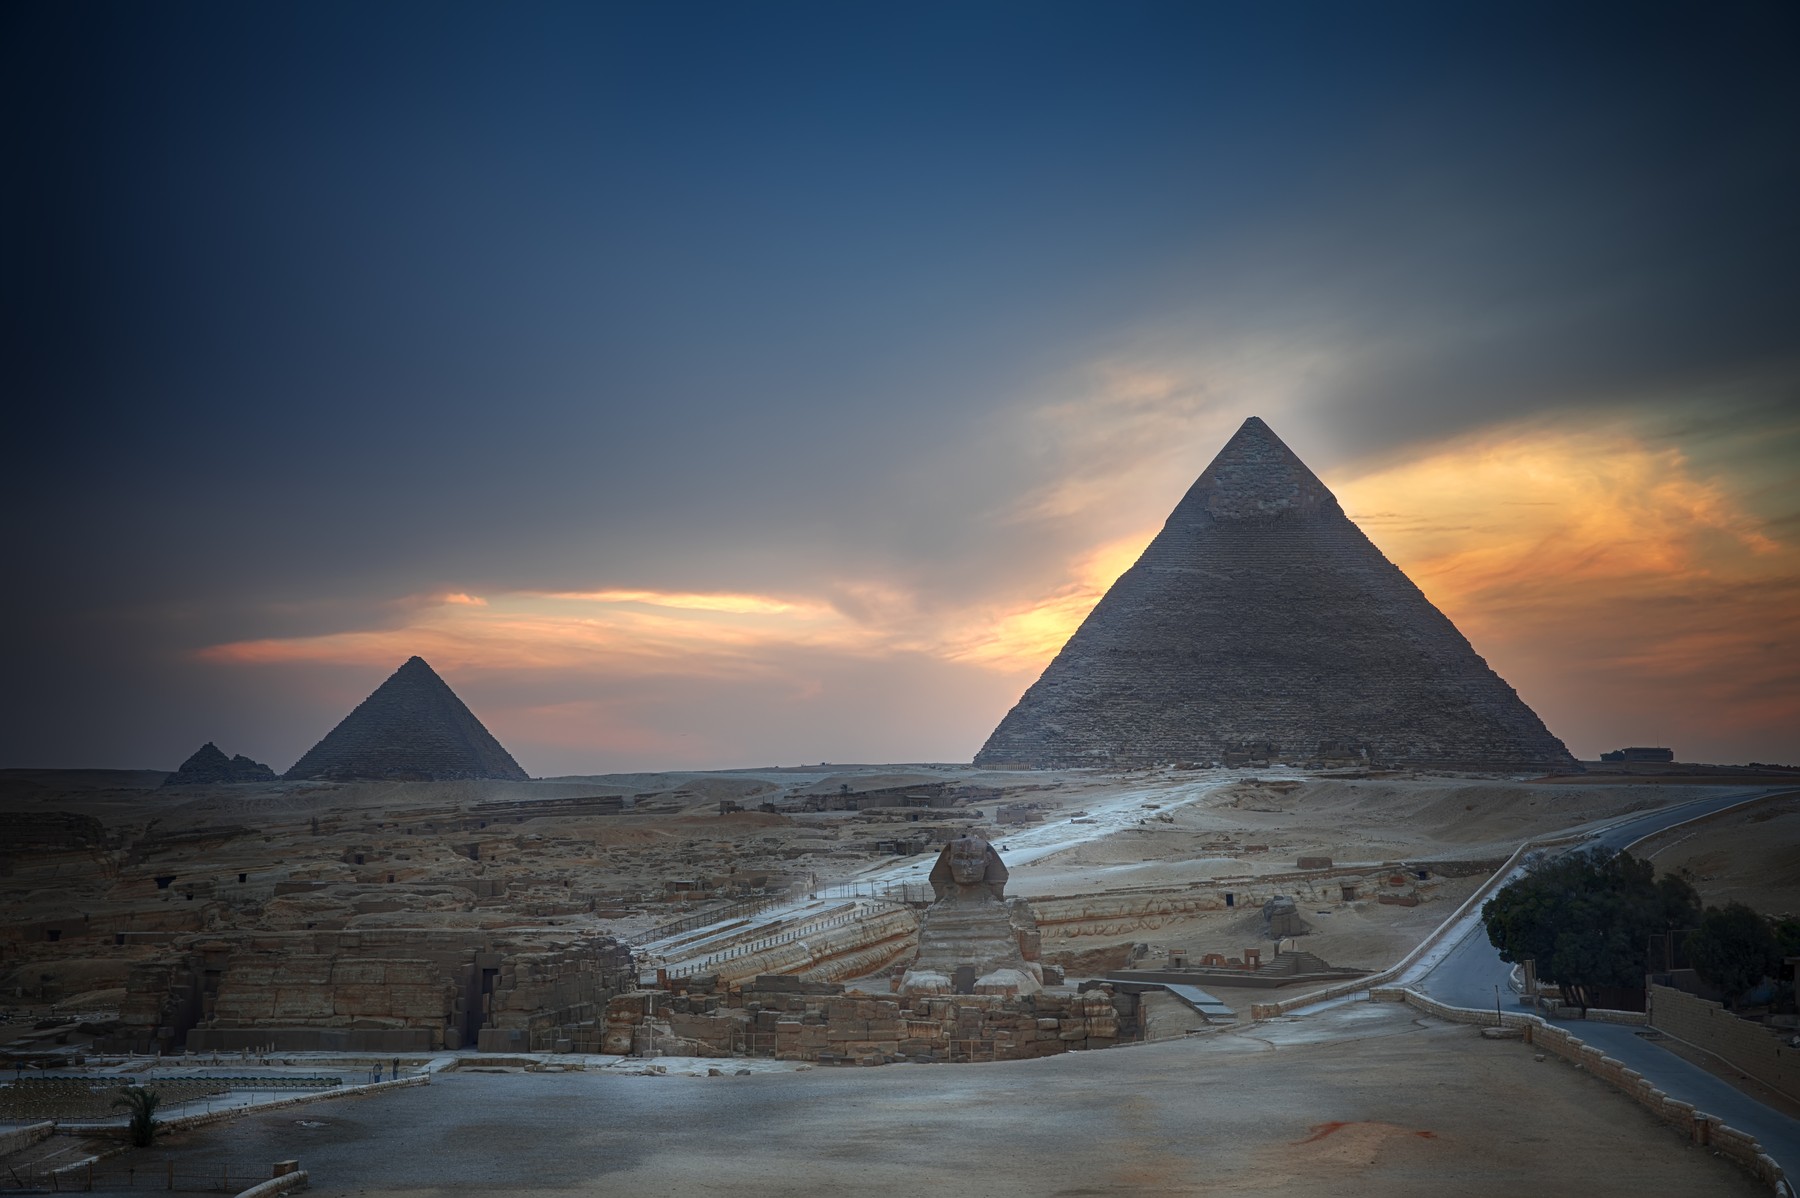 Compelling evidence suggests that Egypt's pyramids were built, and brutal construction helped thousands of years ago, says a new theory